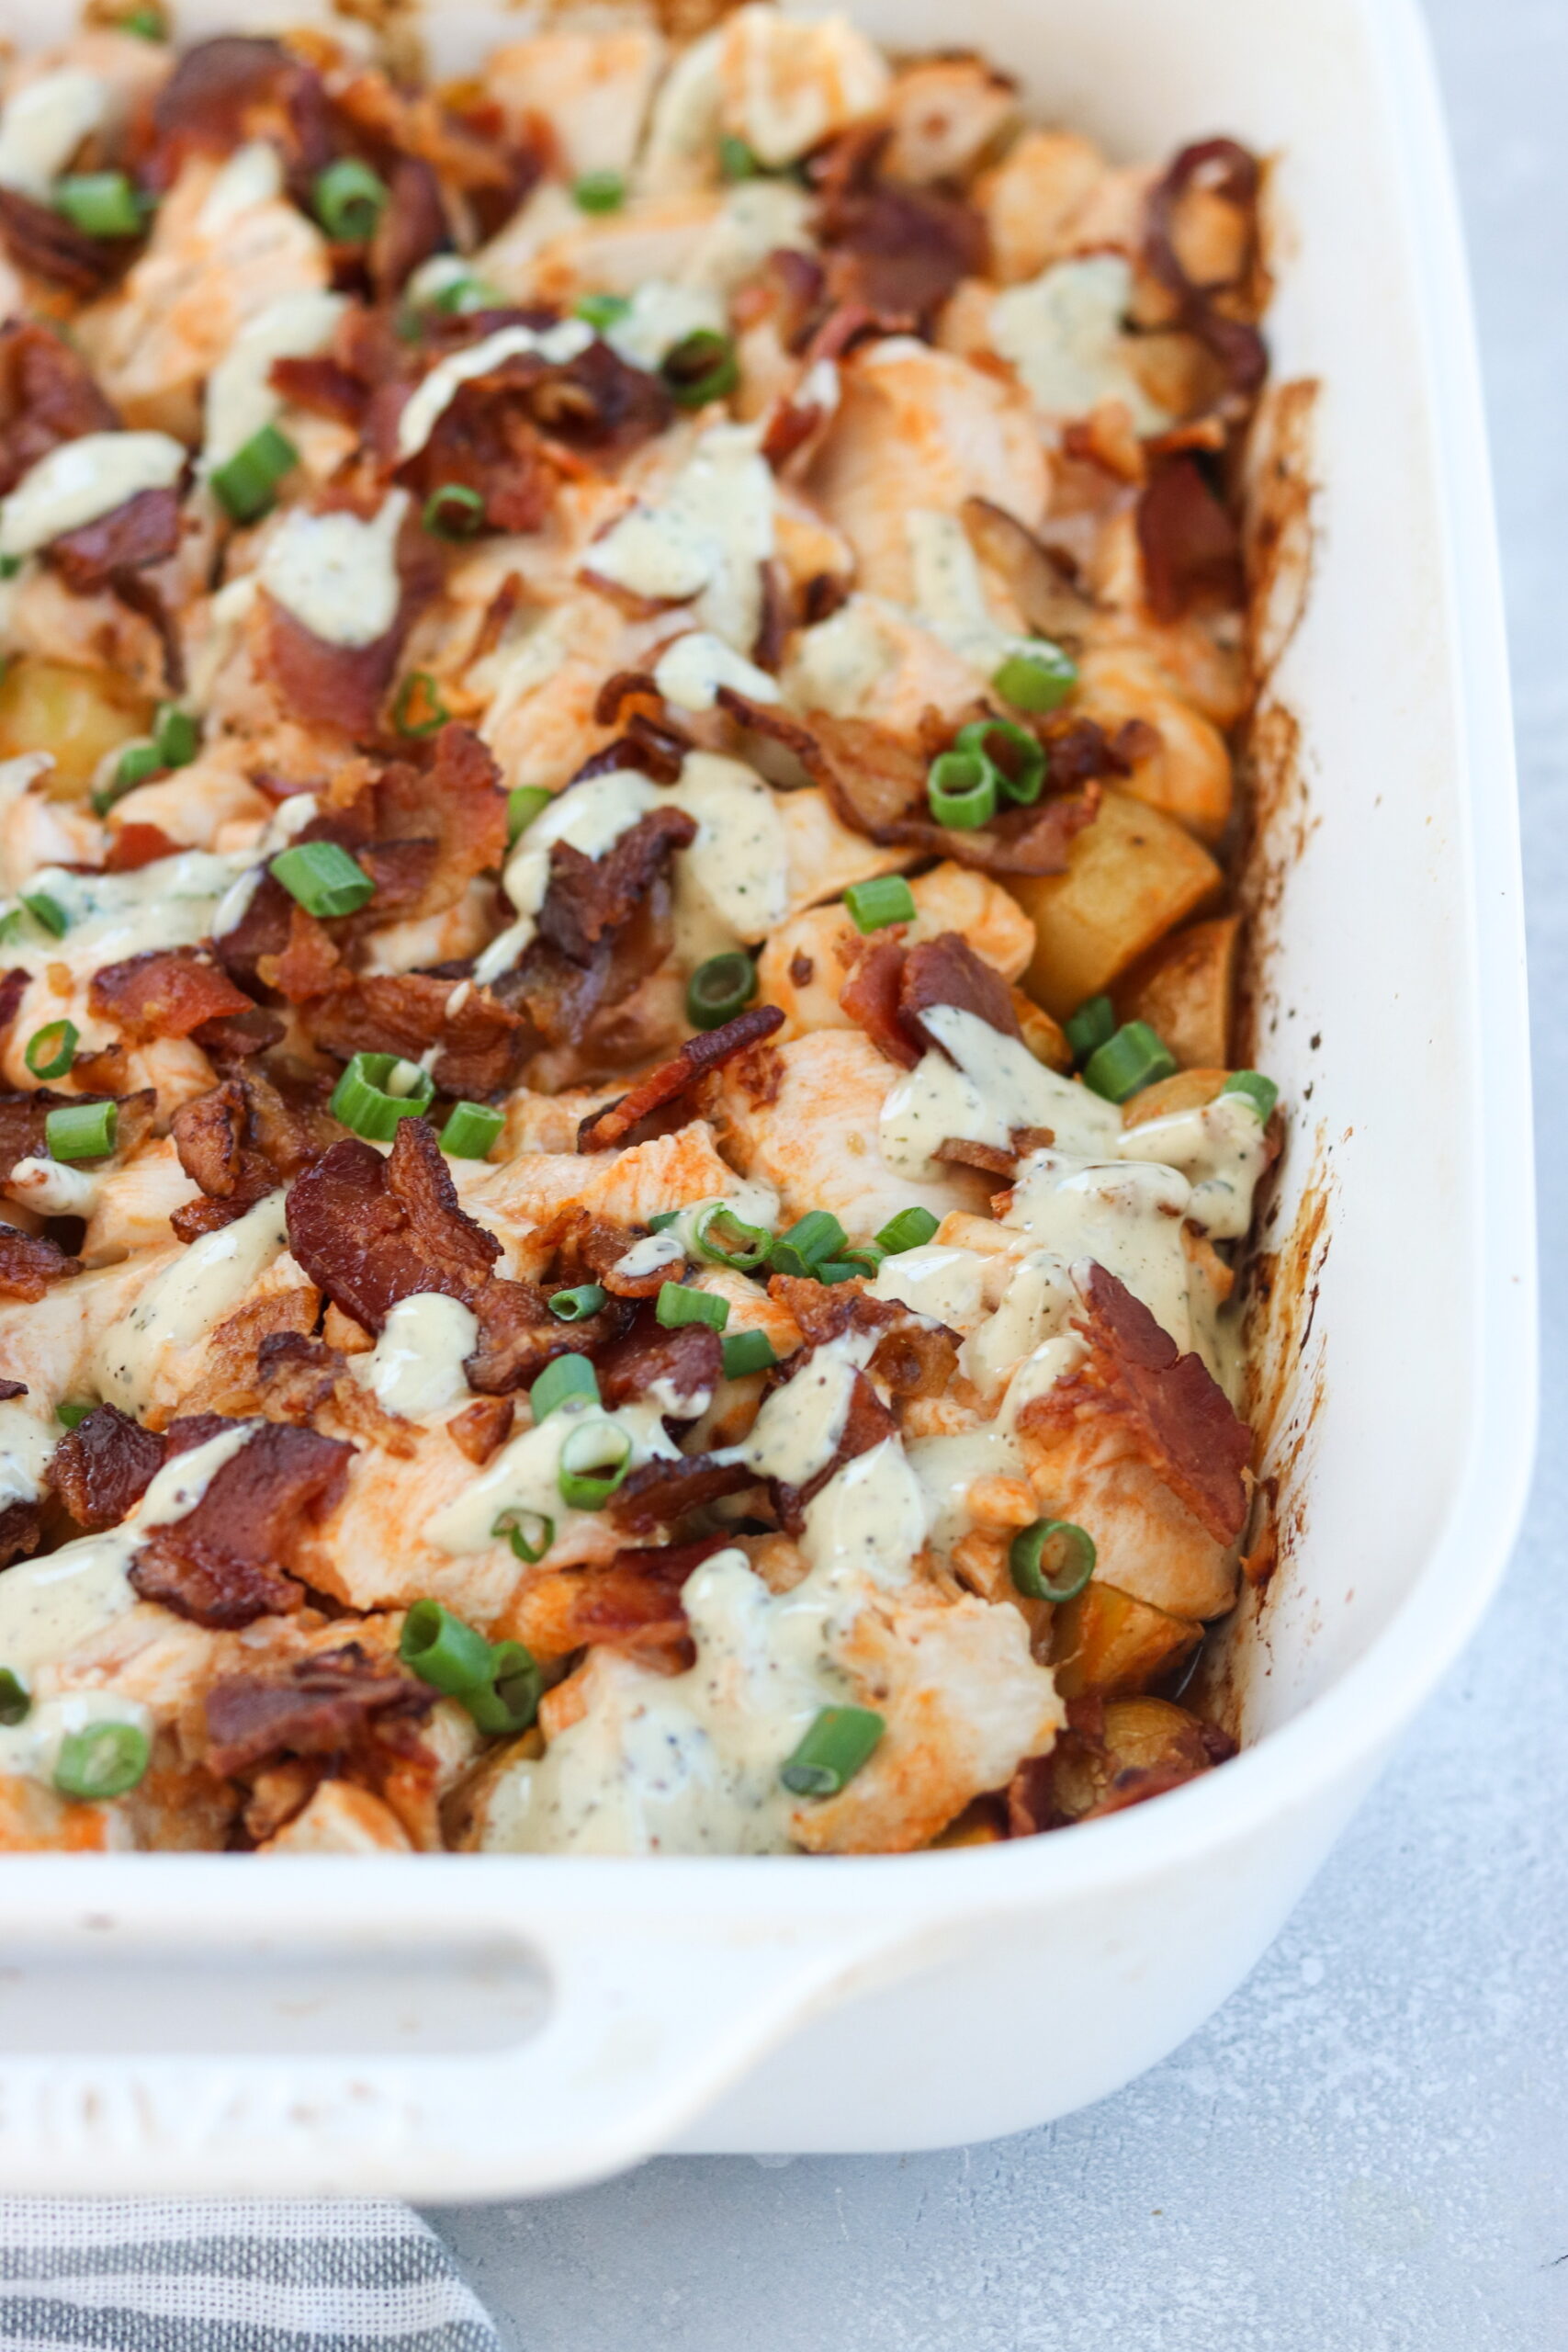 Loaded potato and Buffalo chicken casserole that is whole30 and paleo